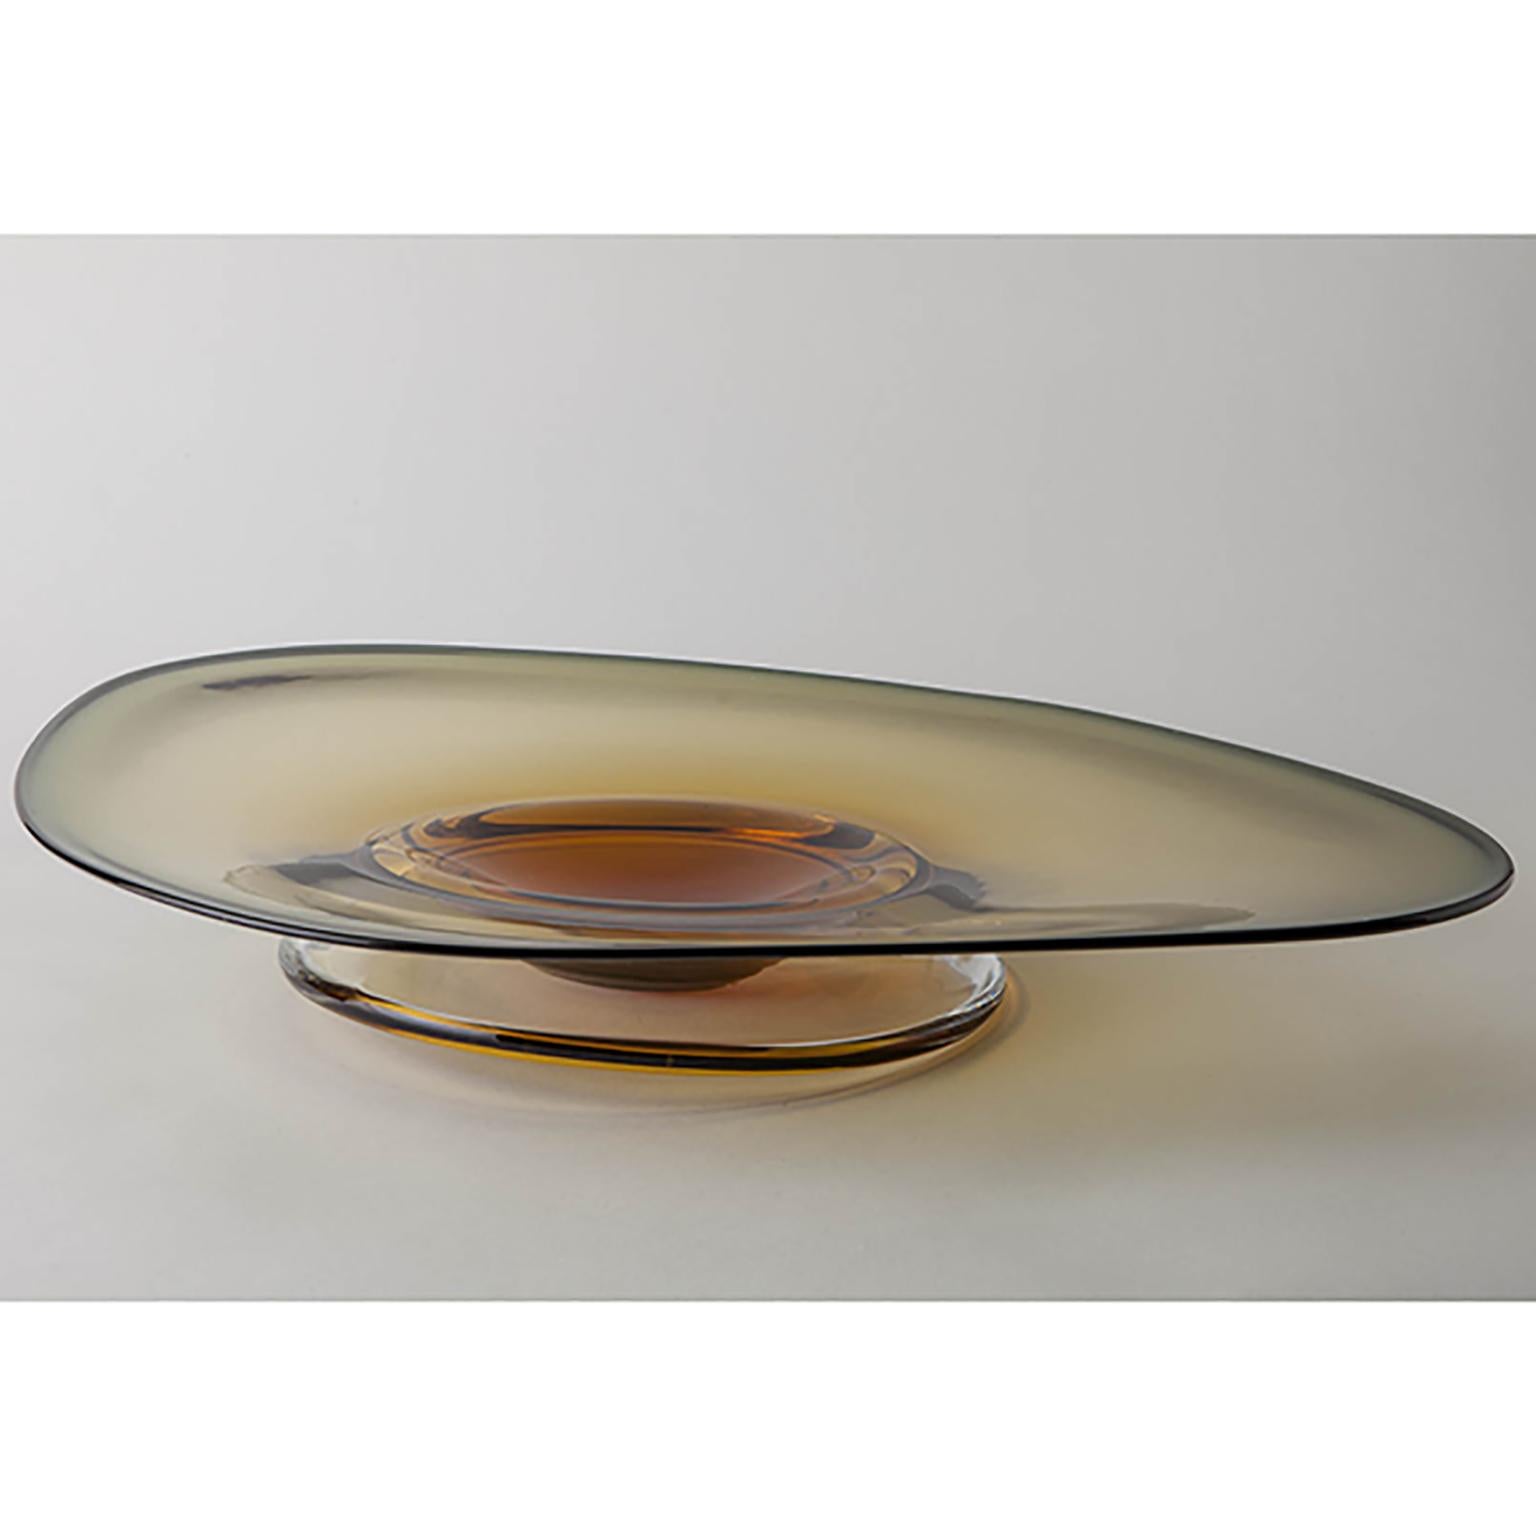 Discover Oculus, a mesmerizing blown glass plate boasting an organic, casual shape. Crafted with meticulous attention to detail, each piece is a testament to the artistry of glassmaking.

The unique form of Oculus is achieved through a fascinating